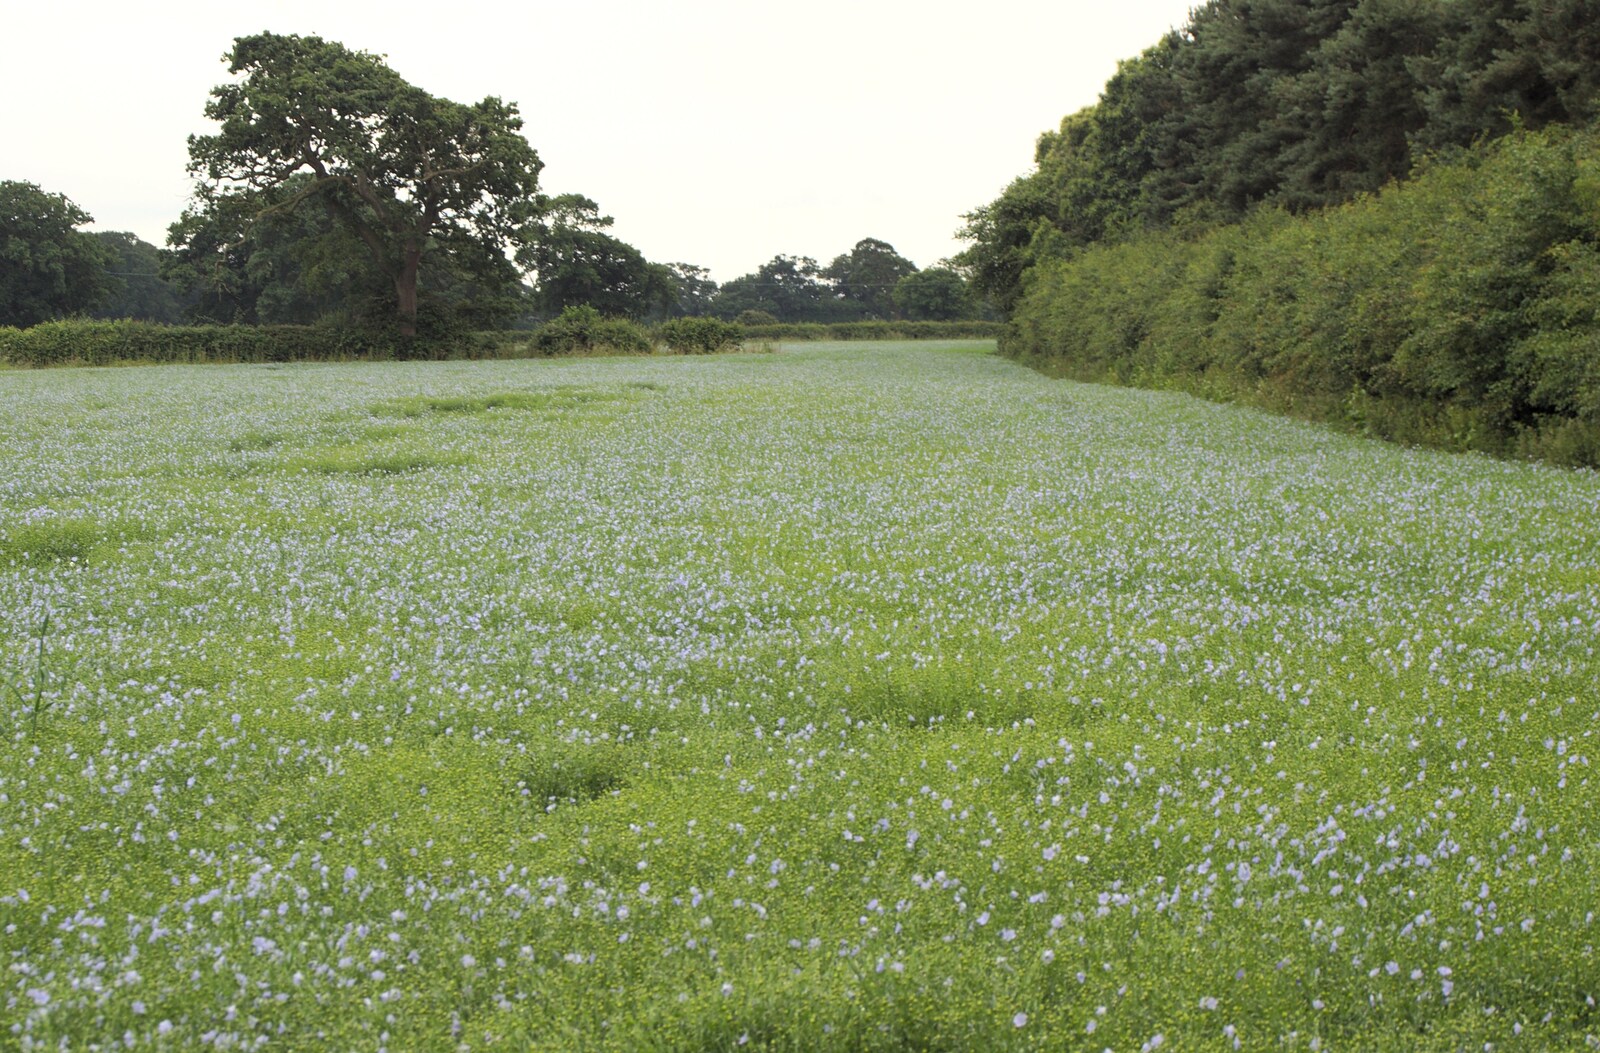 A field of delicate linseed from A Camper Van Odyssey: Oxford, Salisbury, New Forest and Barton-on-Sea - 19th June 2011